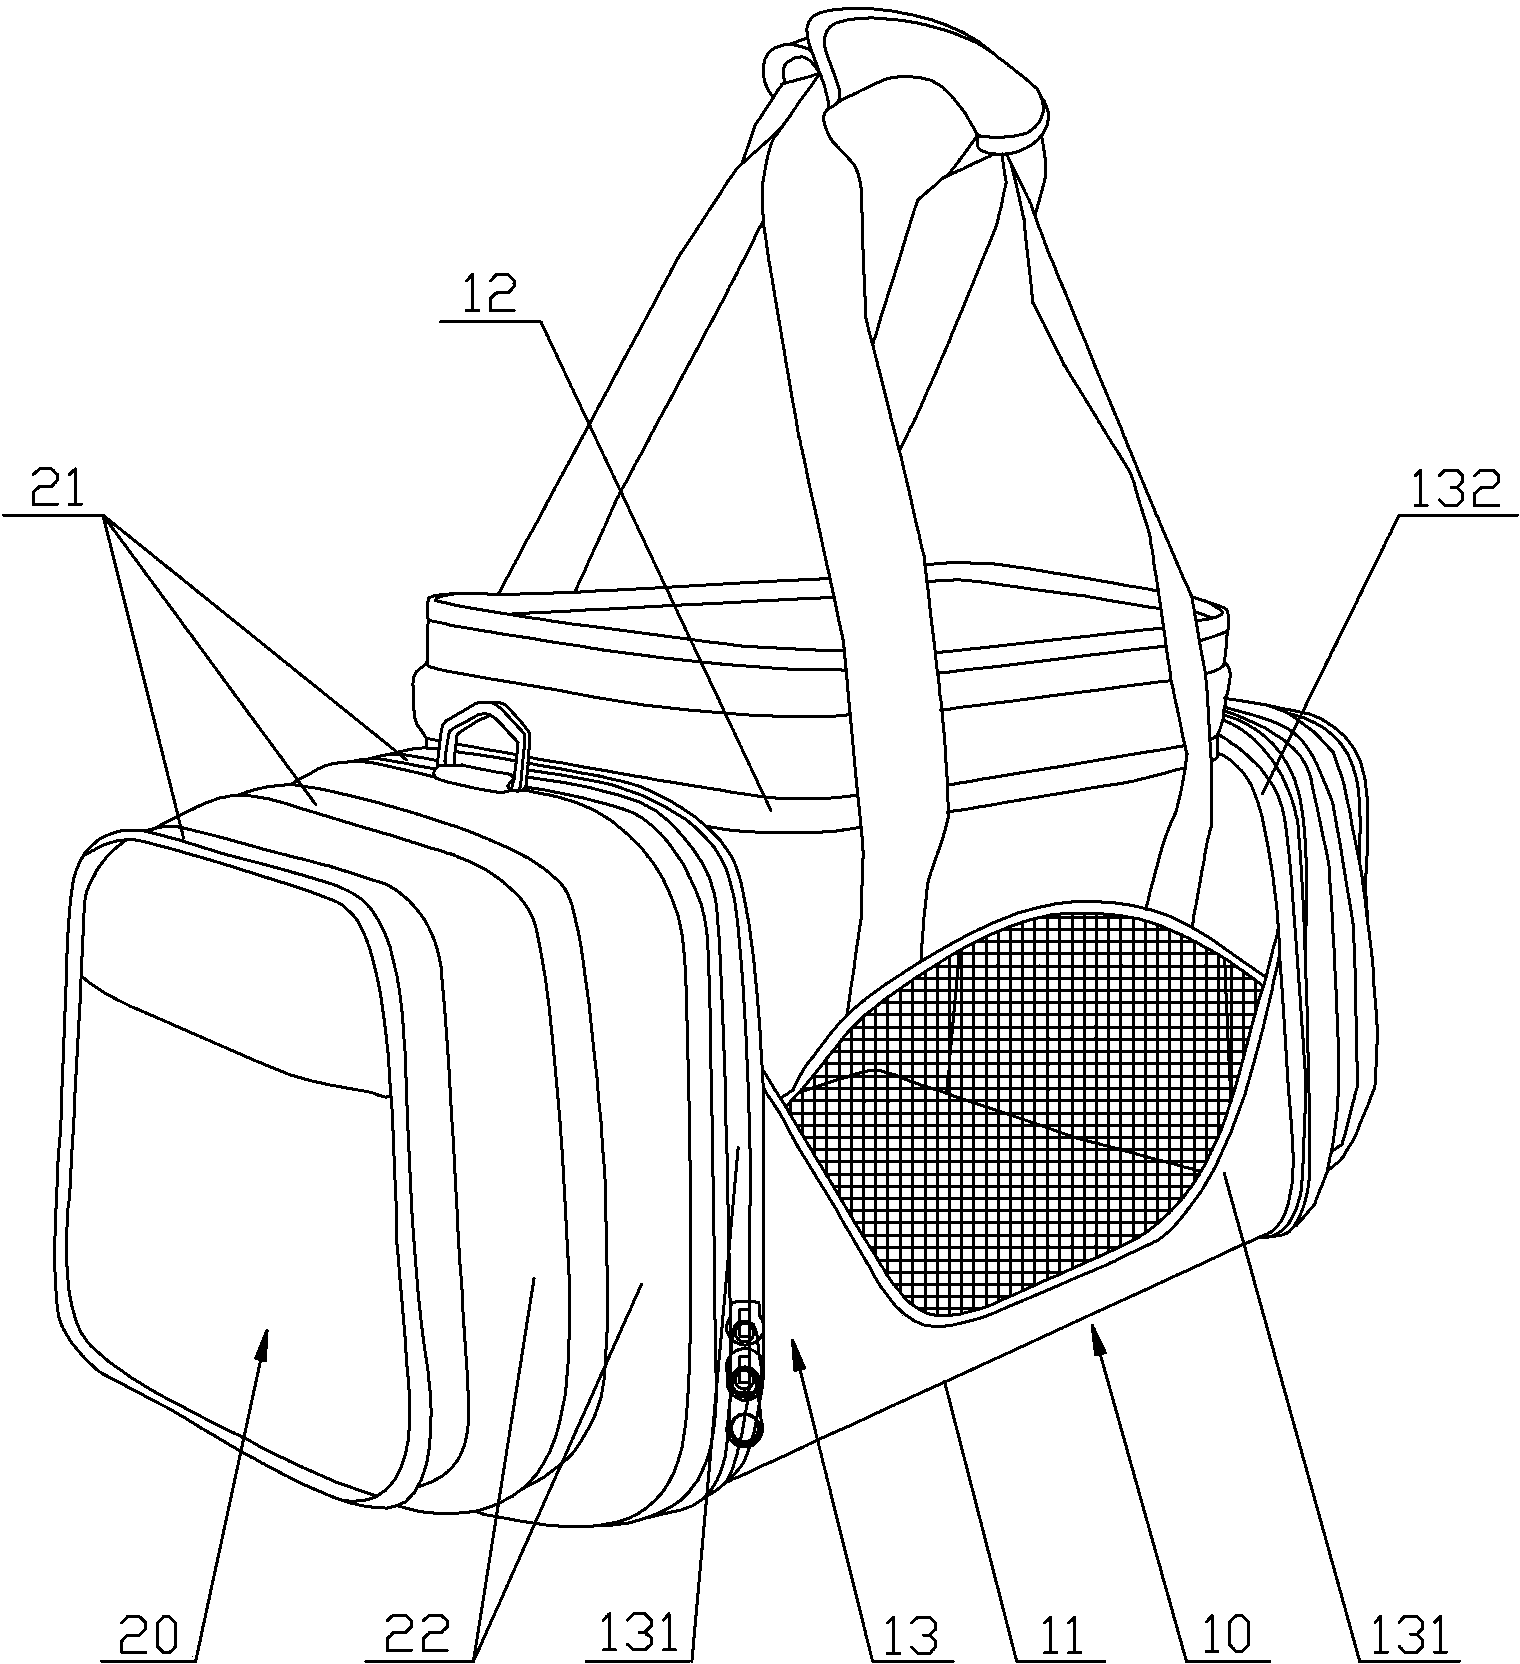 Pet bag capable of stretching and expanding